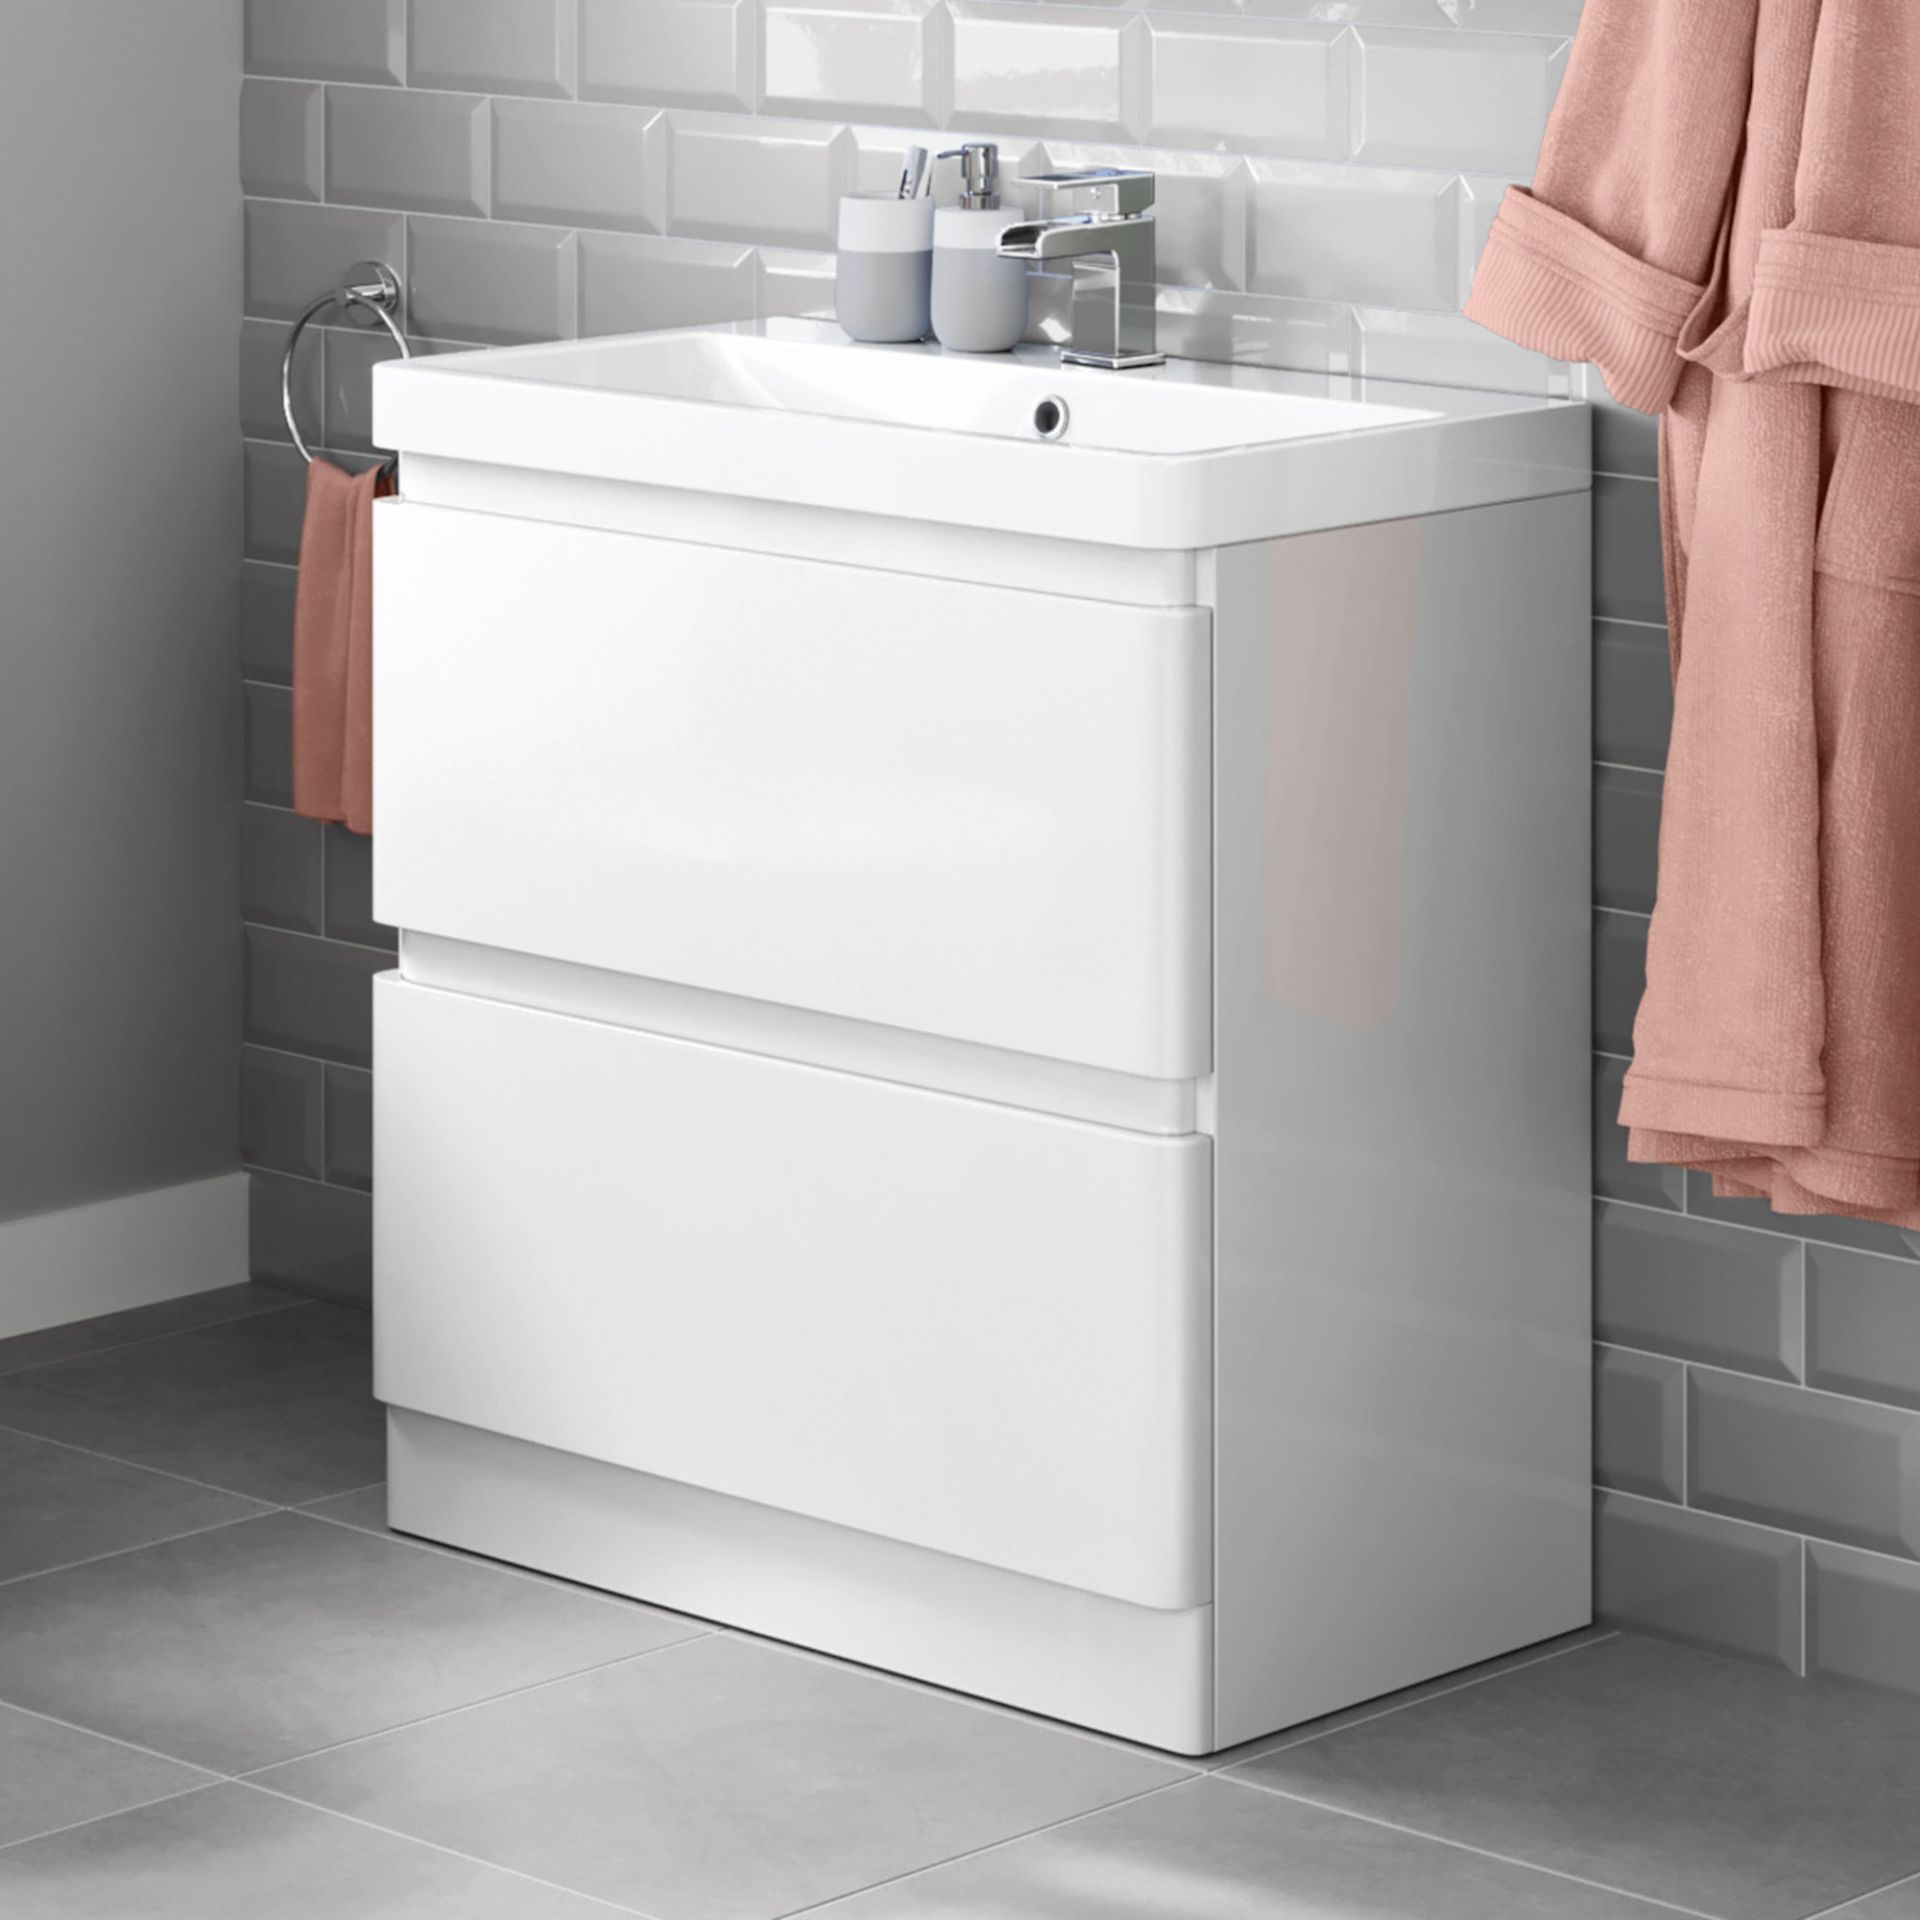 (A23) 800mm Denver Gloss White Built In Sink Drawer Unit - Floor Standing. RRP £549.99. Comes ...